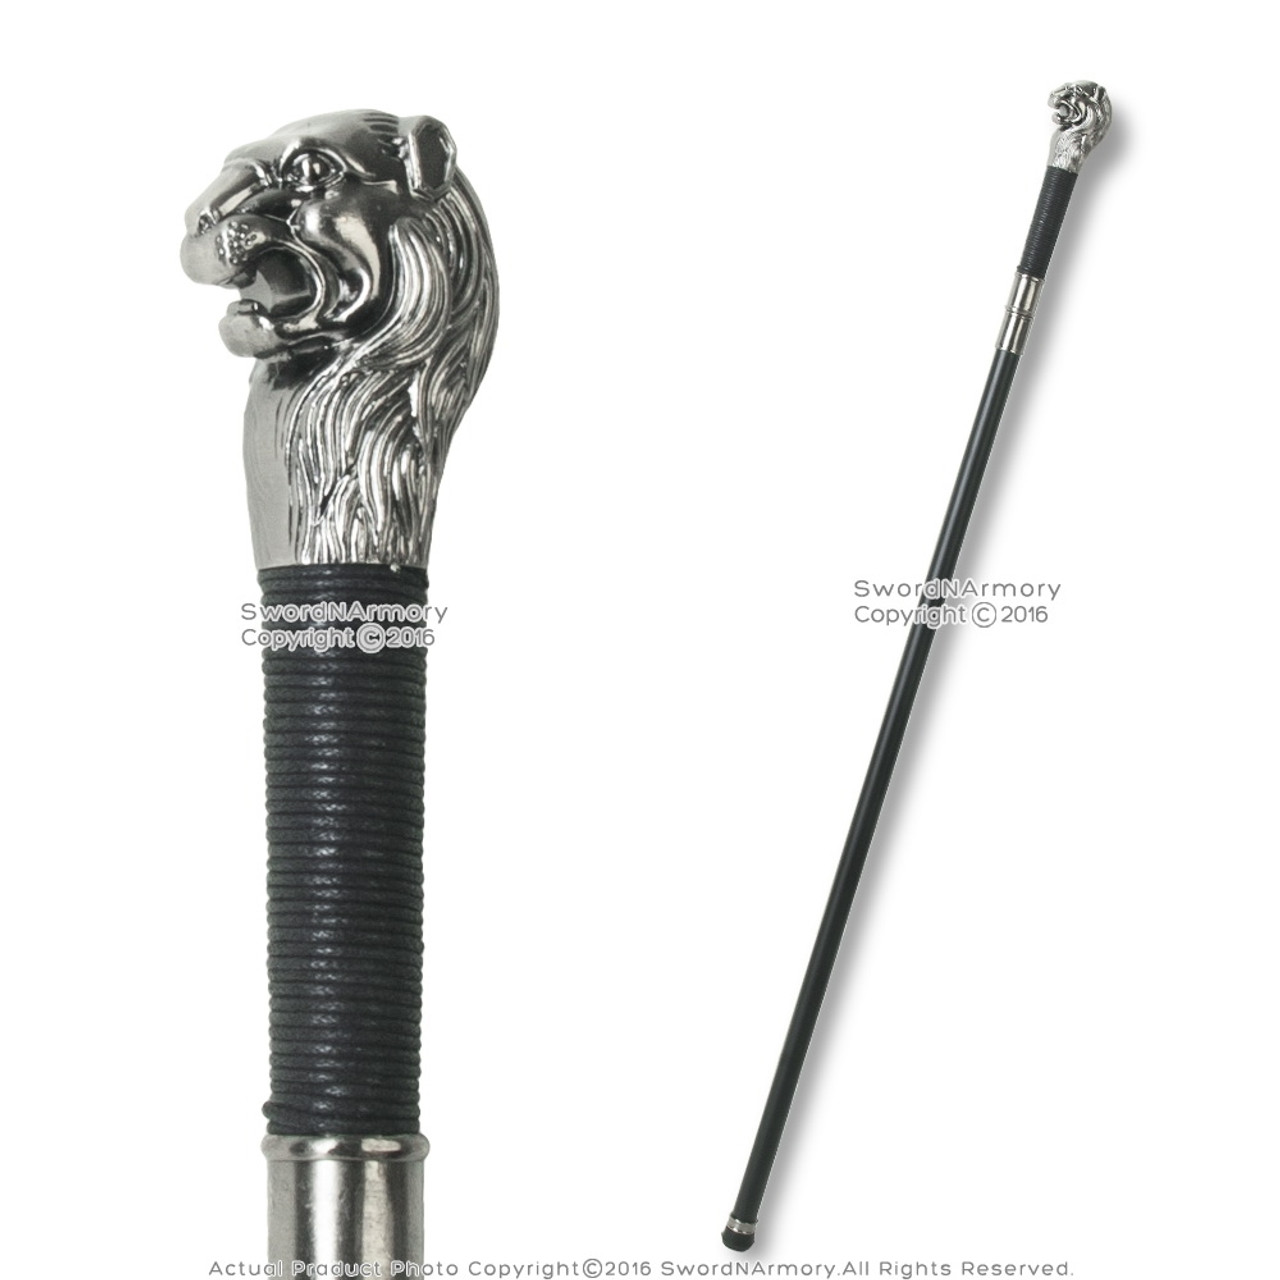 Find A Wholesale metal handle walking stick and cane For Your